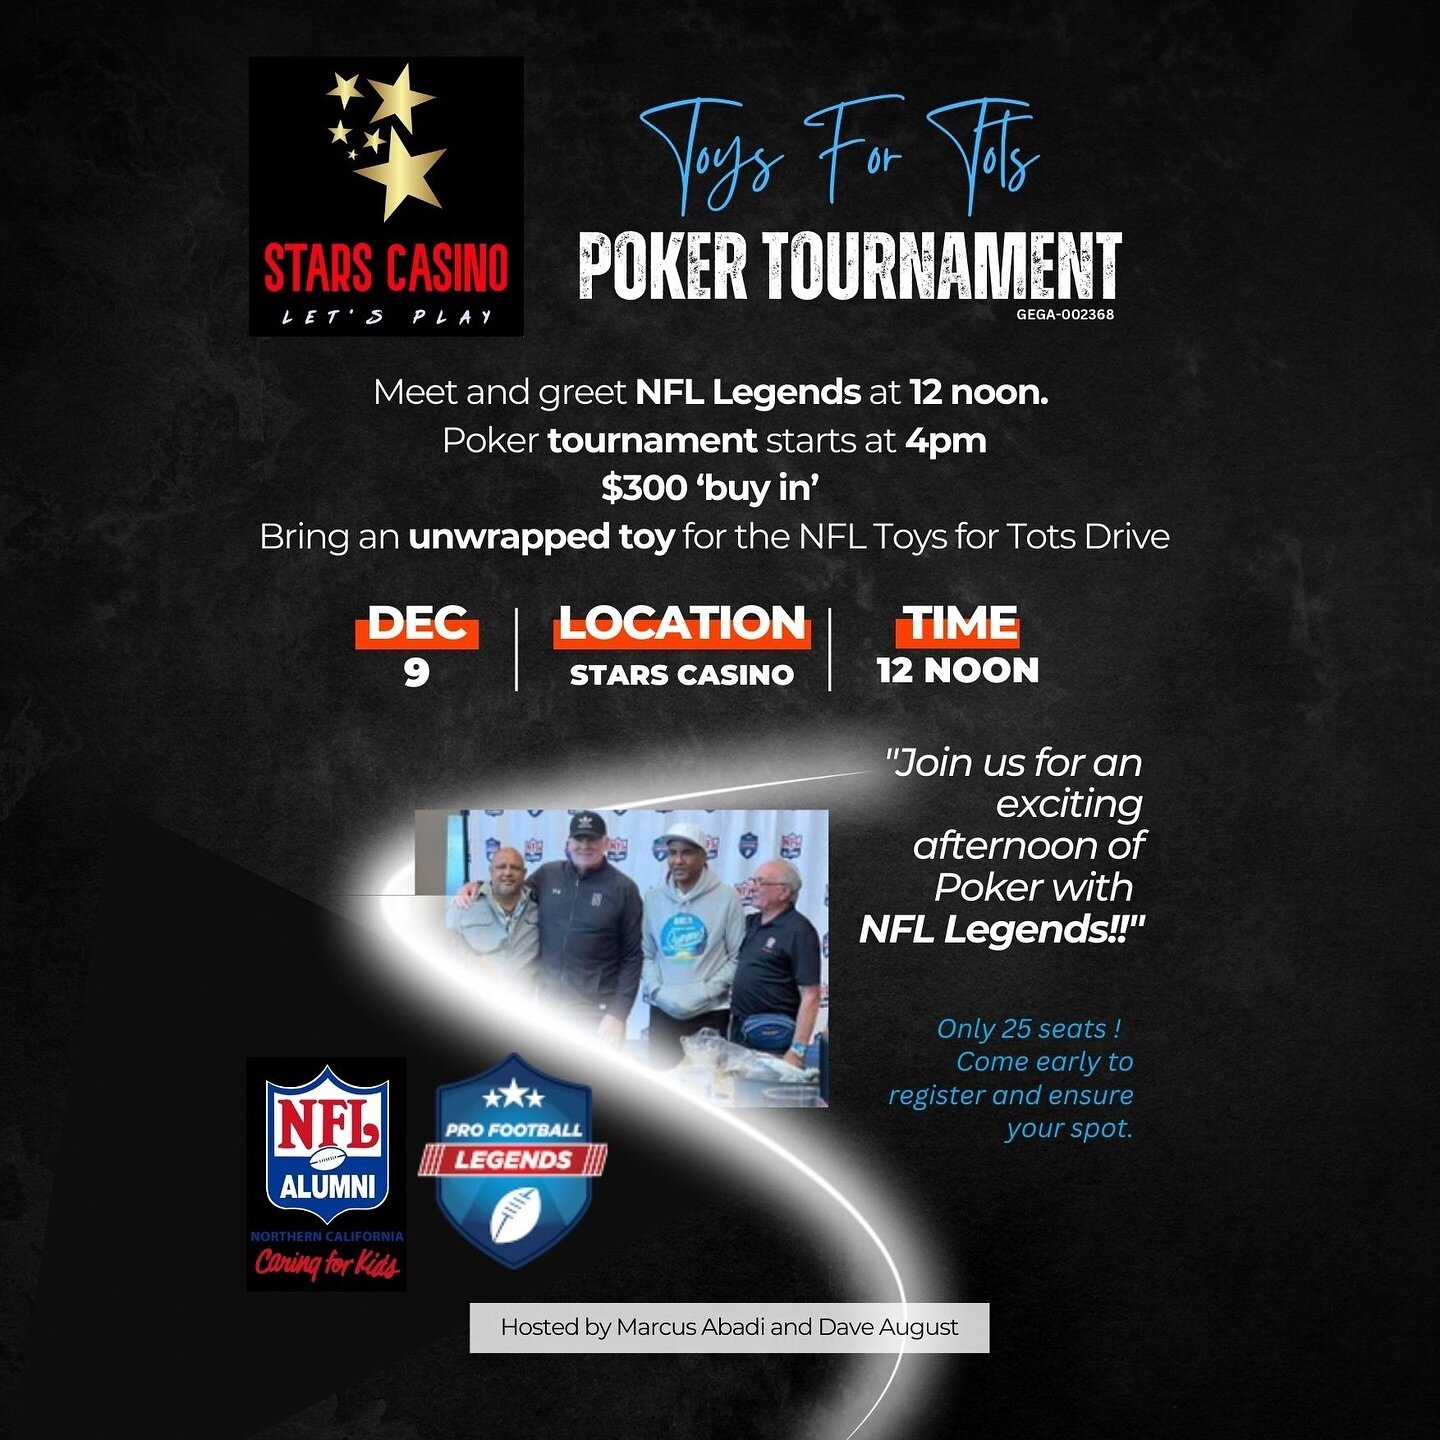 ⭐️ Sign up in person tomorrow 12/9 for our NFL Aimmi x Toys For Tots 1st Annual Toy Drive &amp; Poker Tournament at Stars Casino in Tracy!!

Meet and greet starts at noon on Saturday, Dec. 9th, and the tournament starts at 4pm.

Bring unwrapped toys 